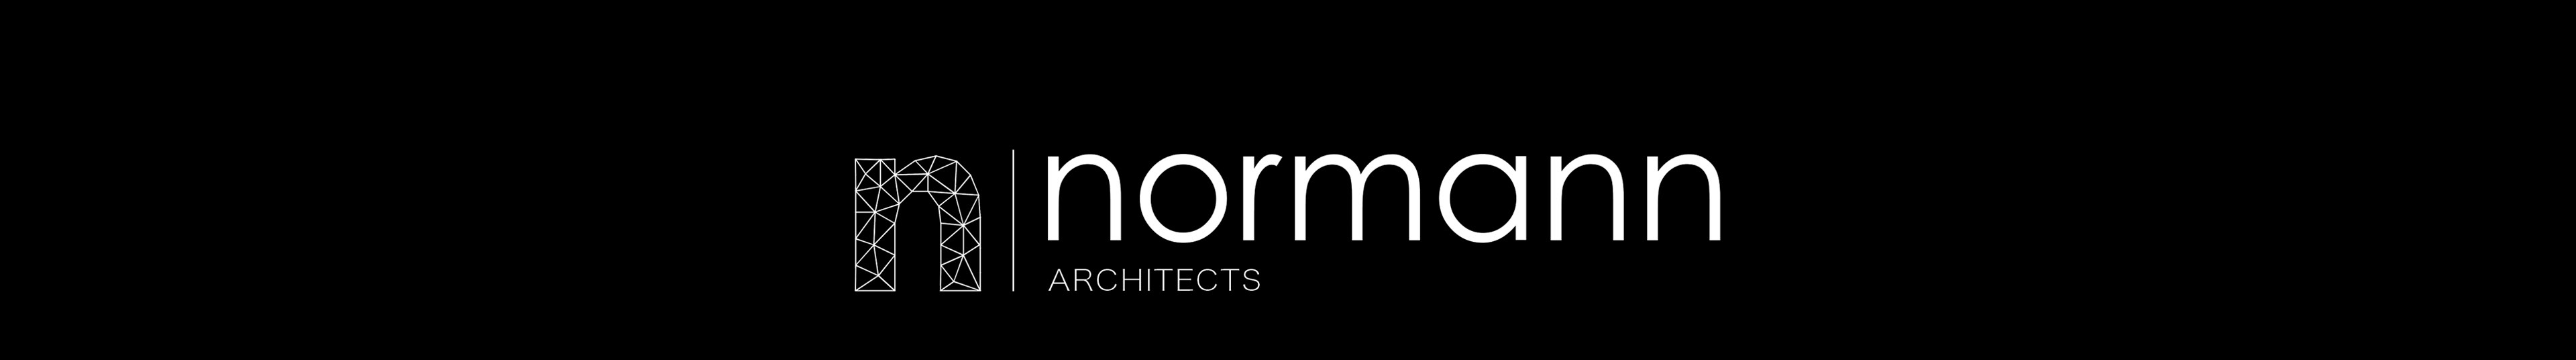 NORMANN architects's profile banner